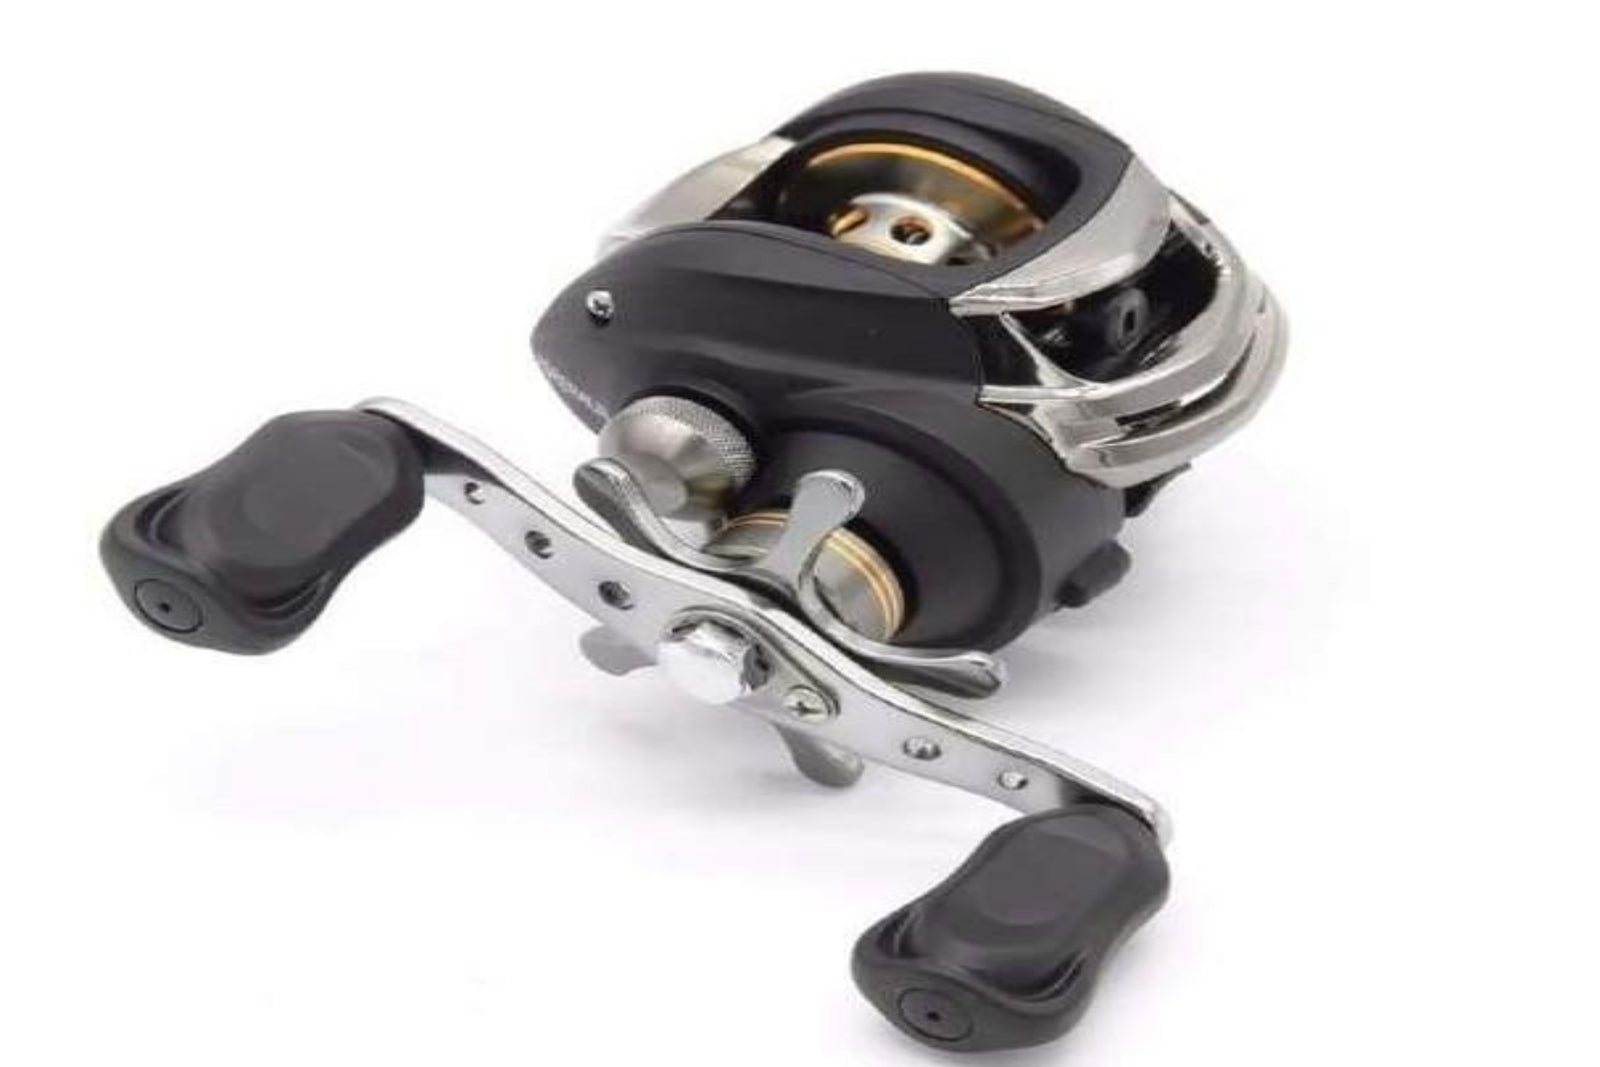 Shimano Caius 150 HG - The Fishing Specialist